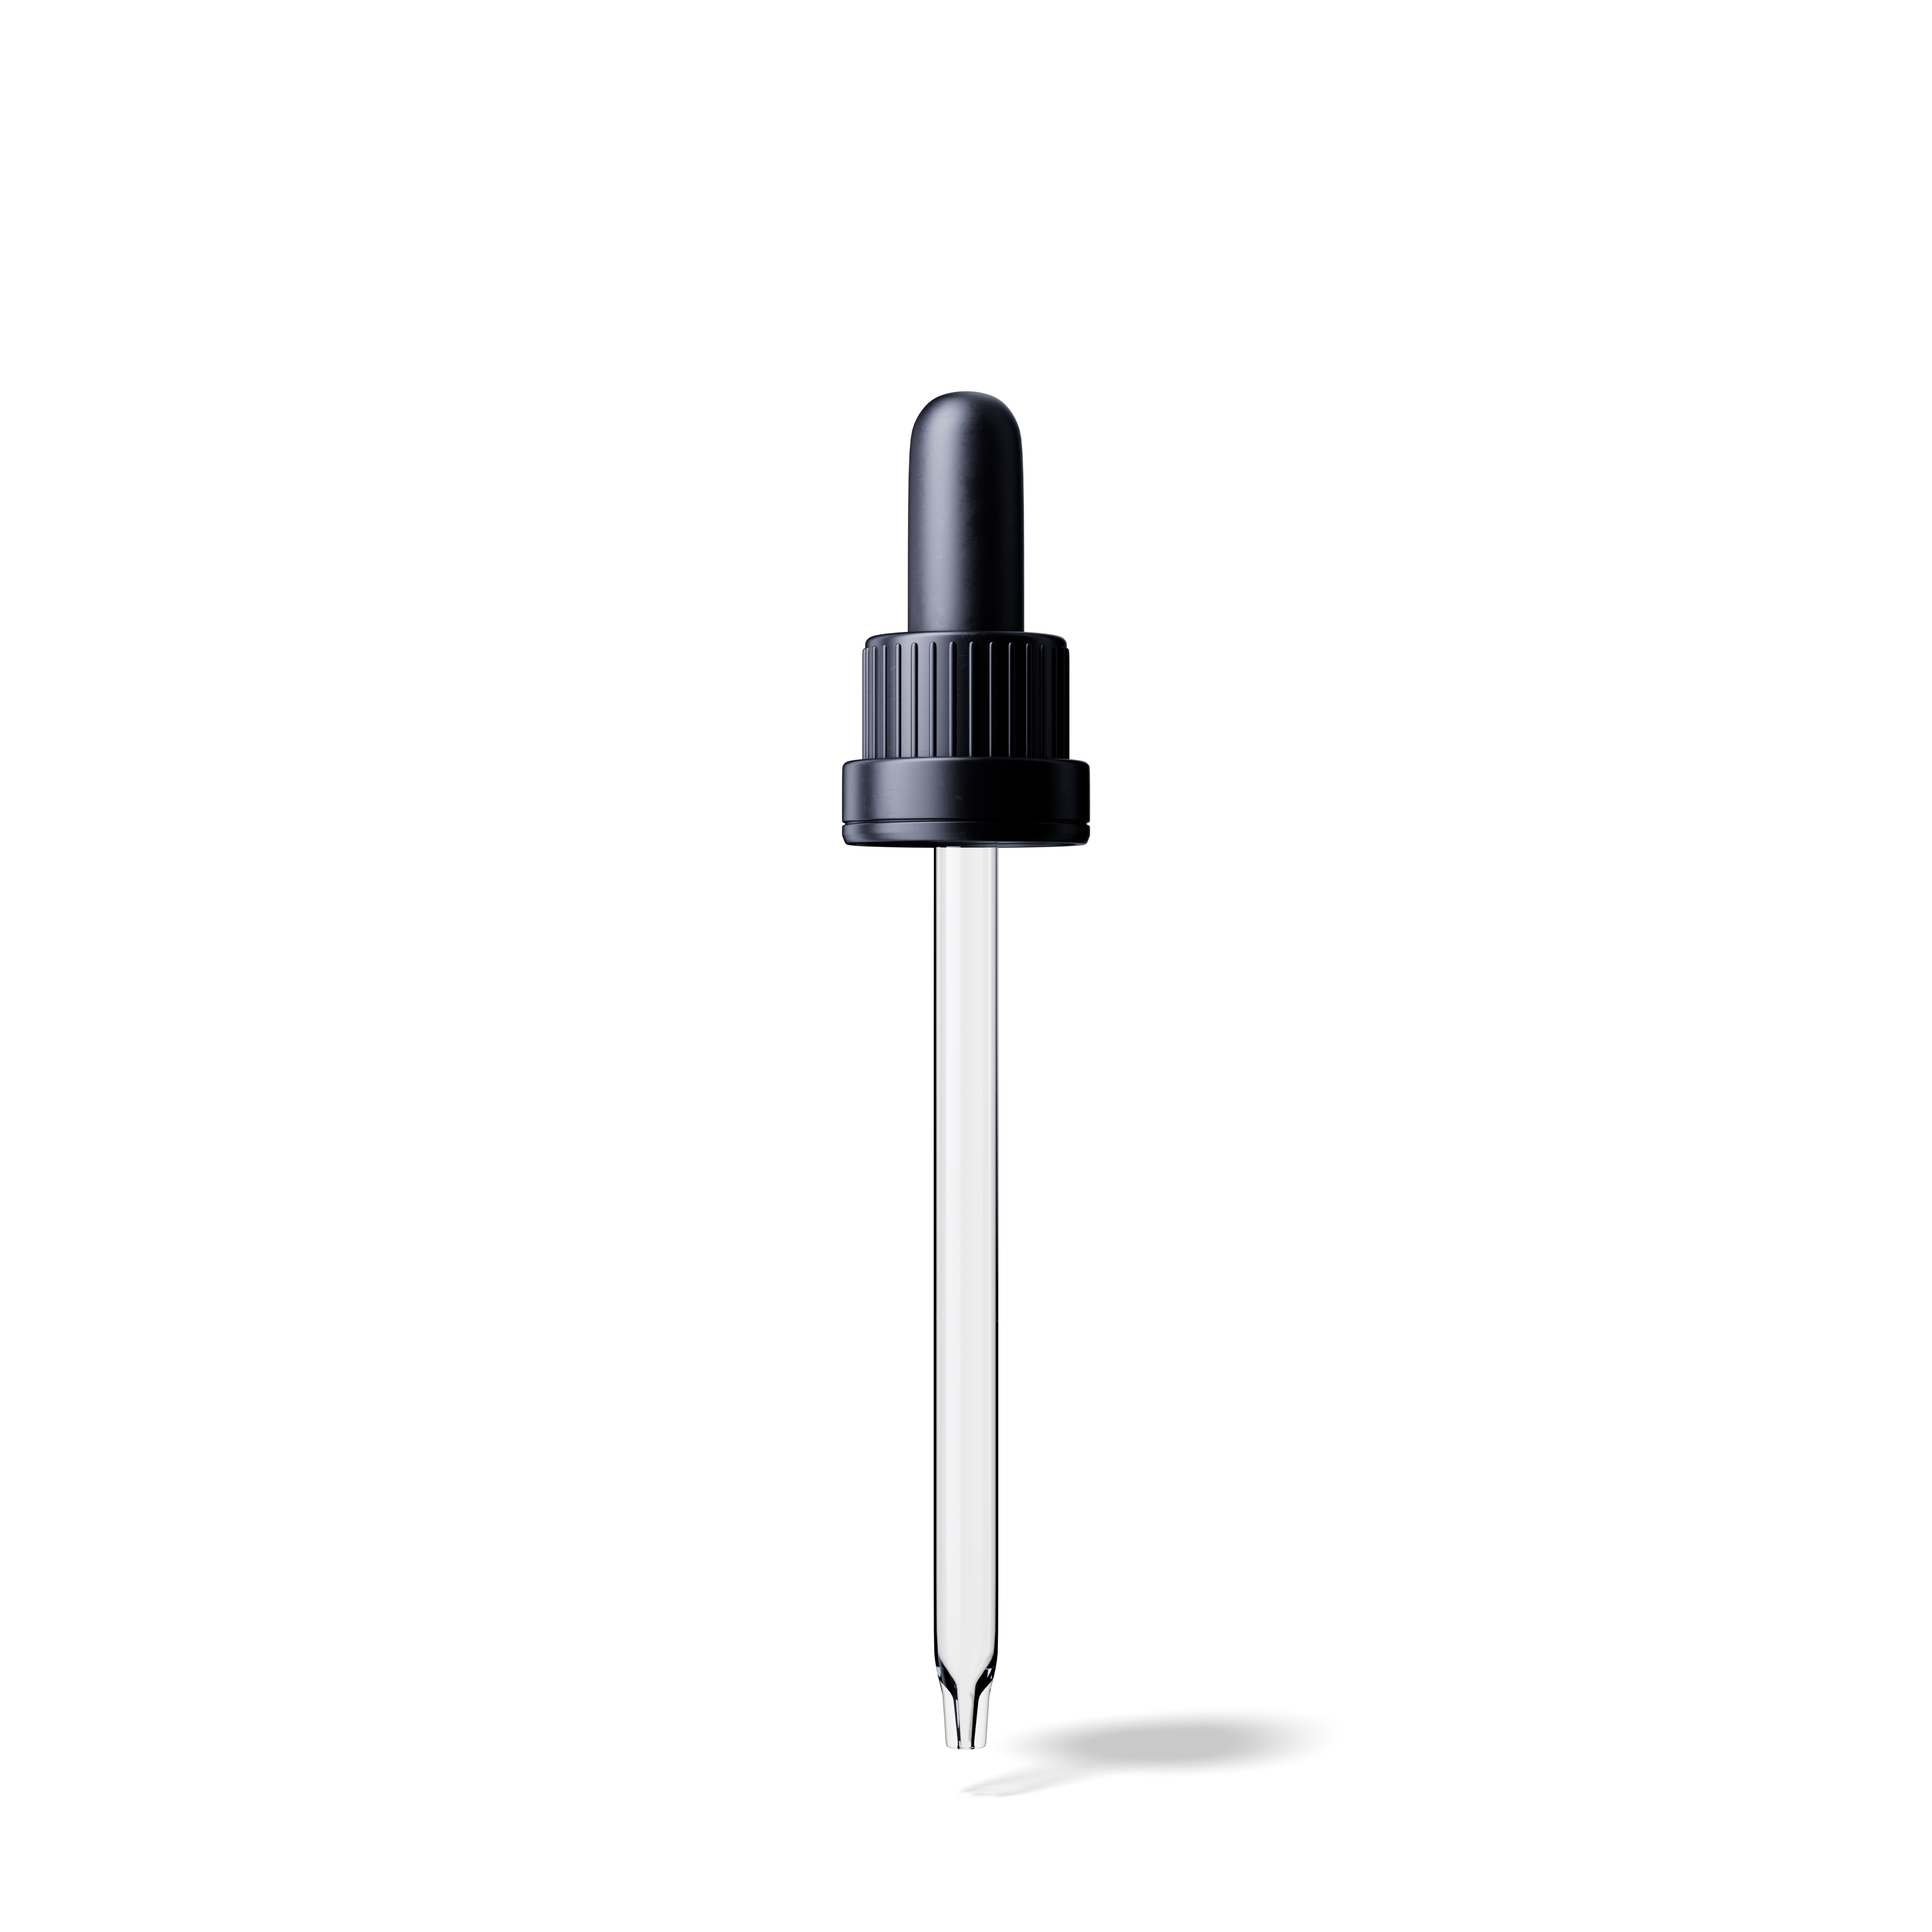 Pipette tamper evident DIN18, III, black, ribbed, bulb TPE, dose 1.0ml, conical tip (Orion 50)